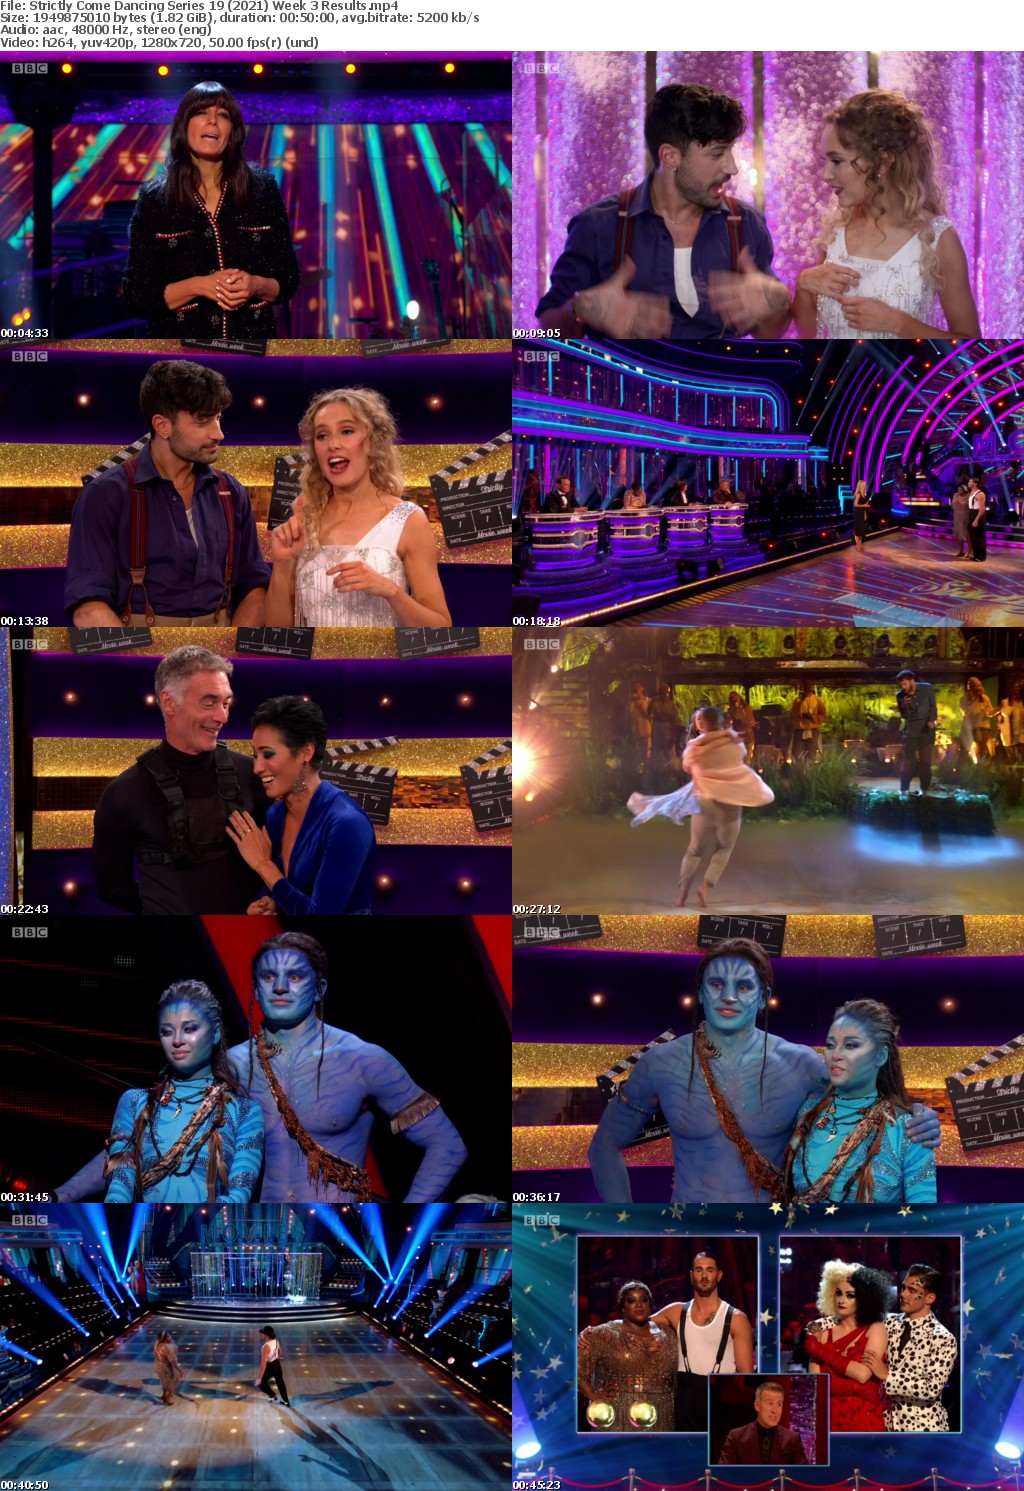 Strictly Come Dancing Series 19 (2021) Week 3 Results (1280x720p HD, 50fps, soft Eng subs)